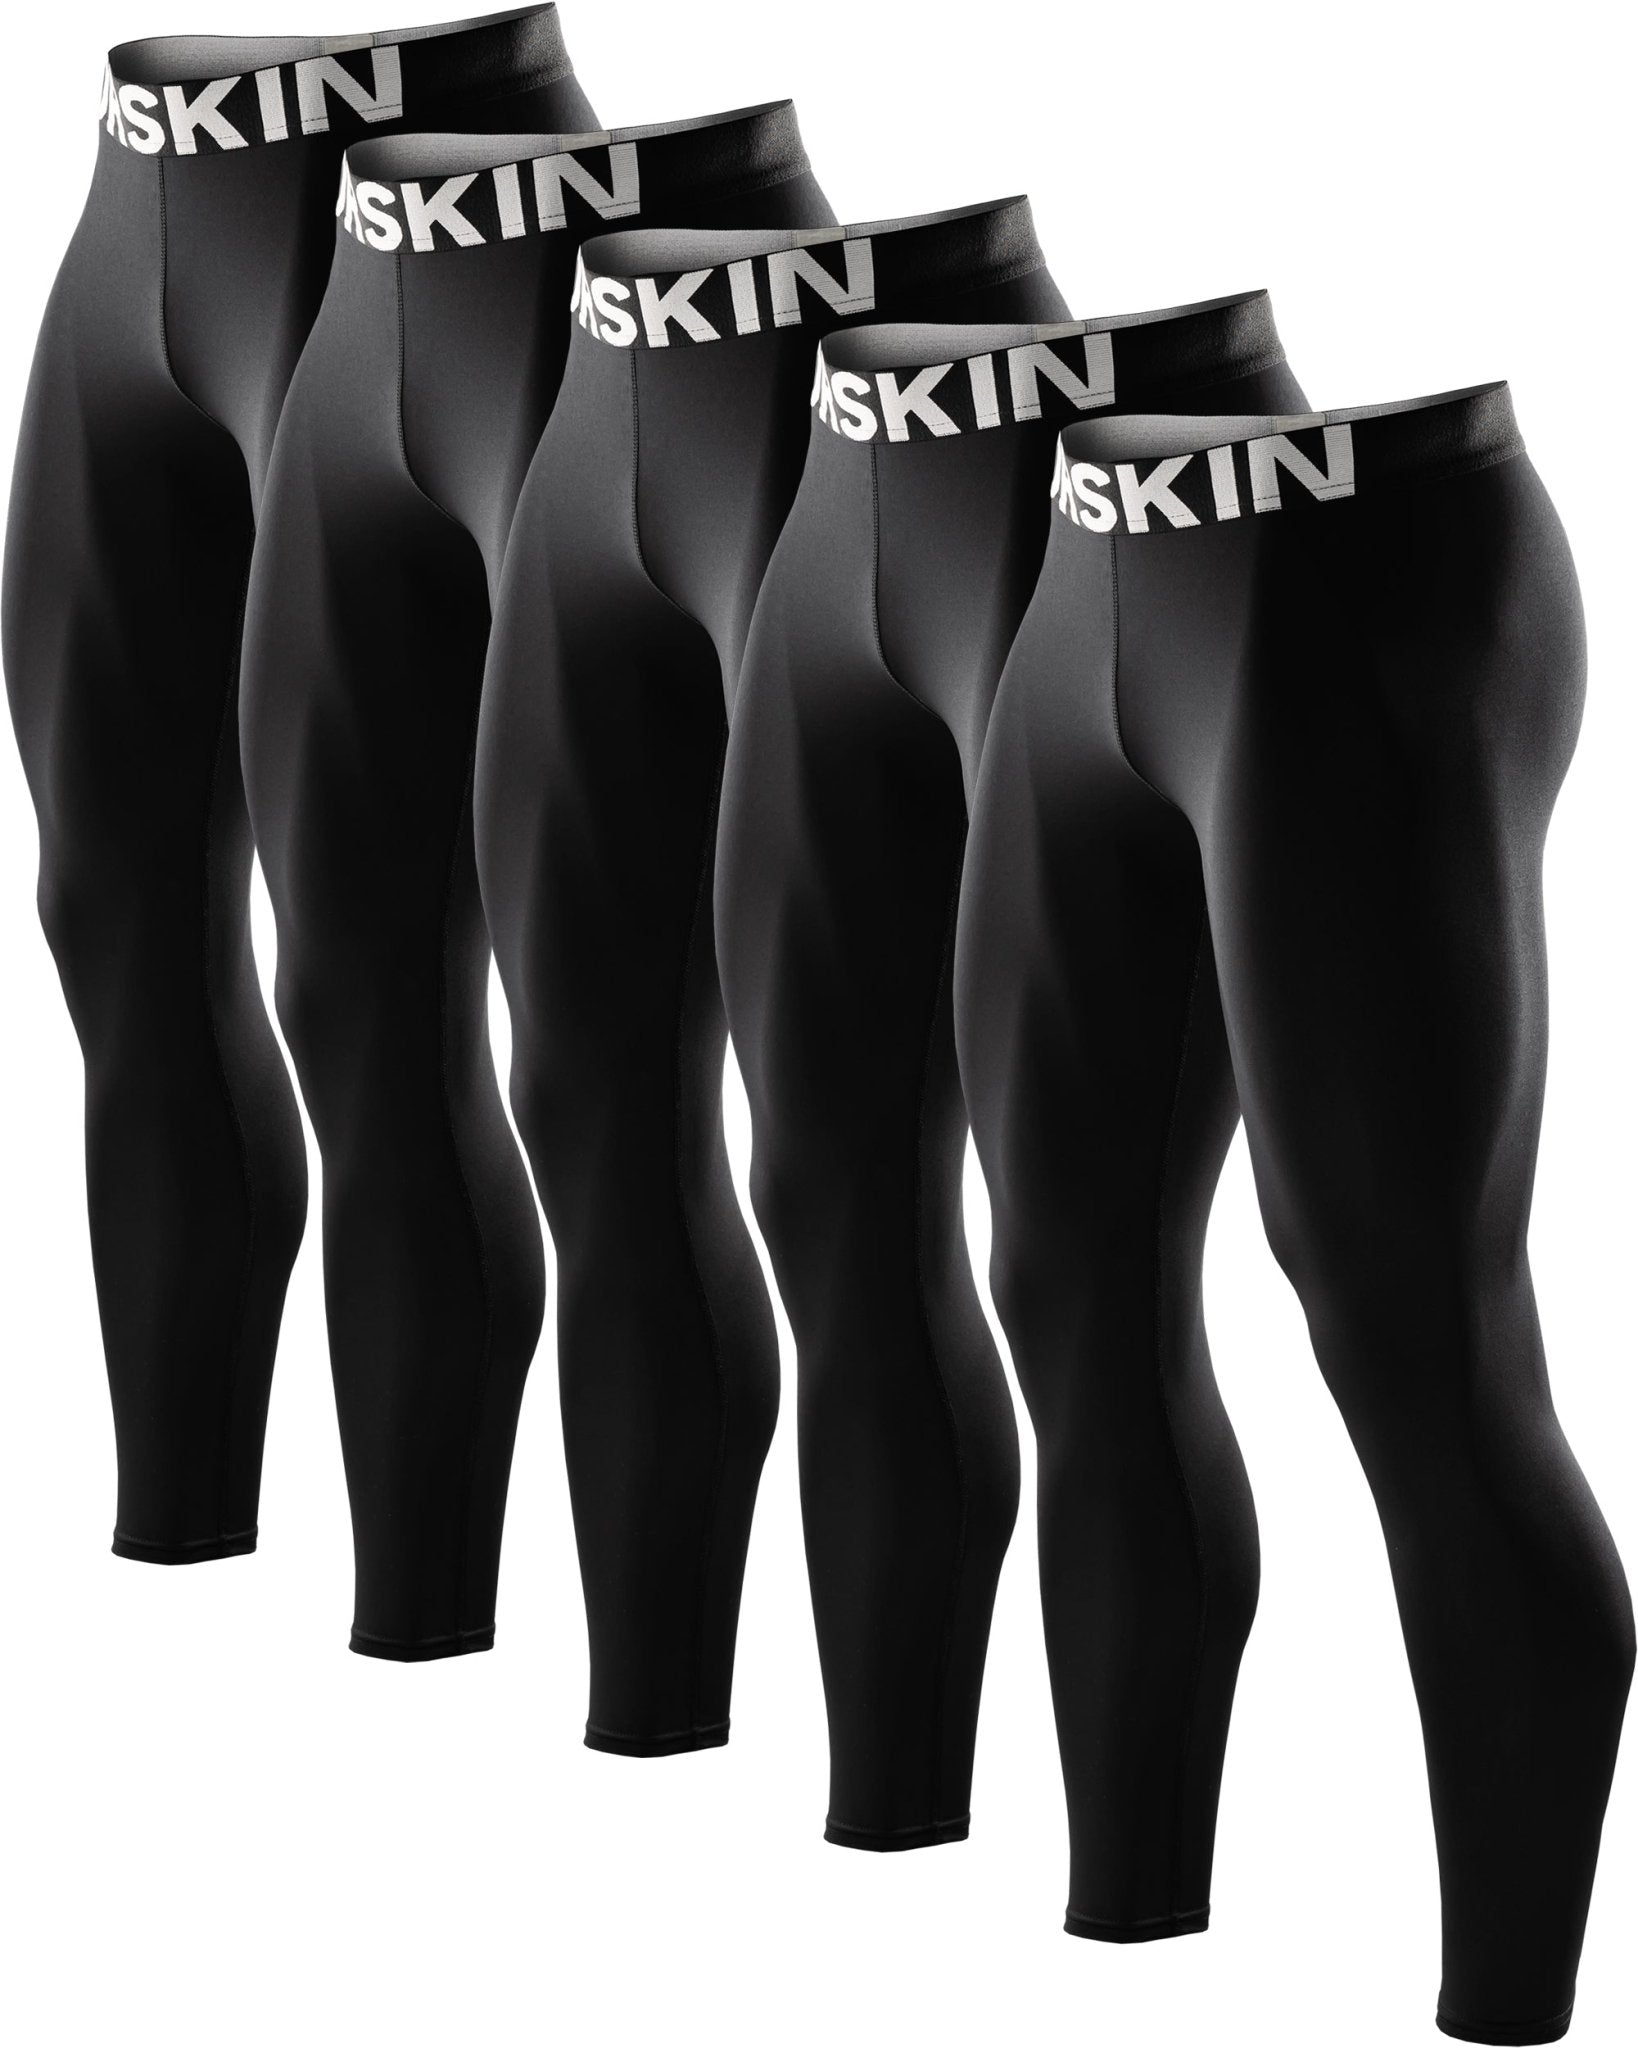 Powergear Dry Fit Standard Compression Pants 5Pack(All Black) - DRSKINSPORTS